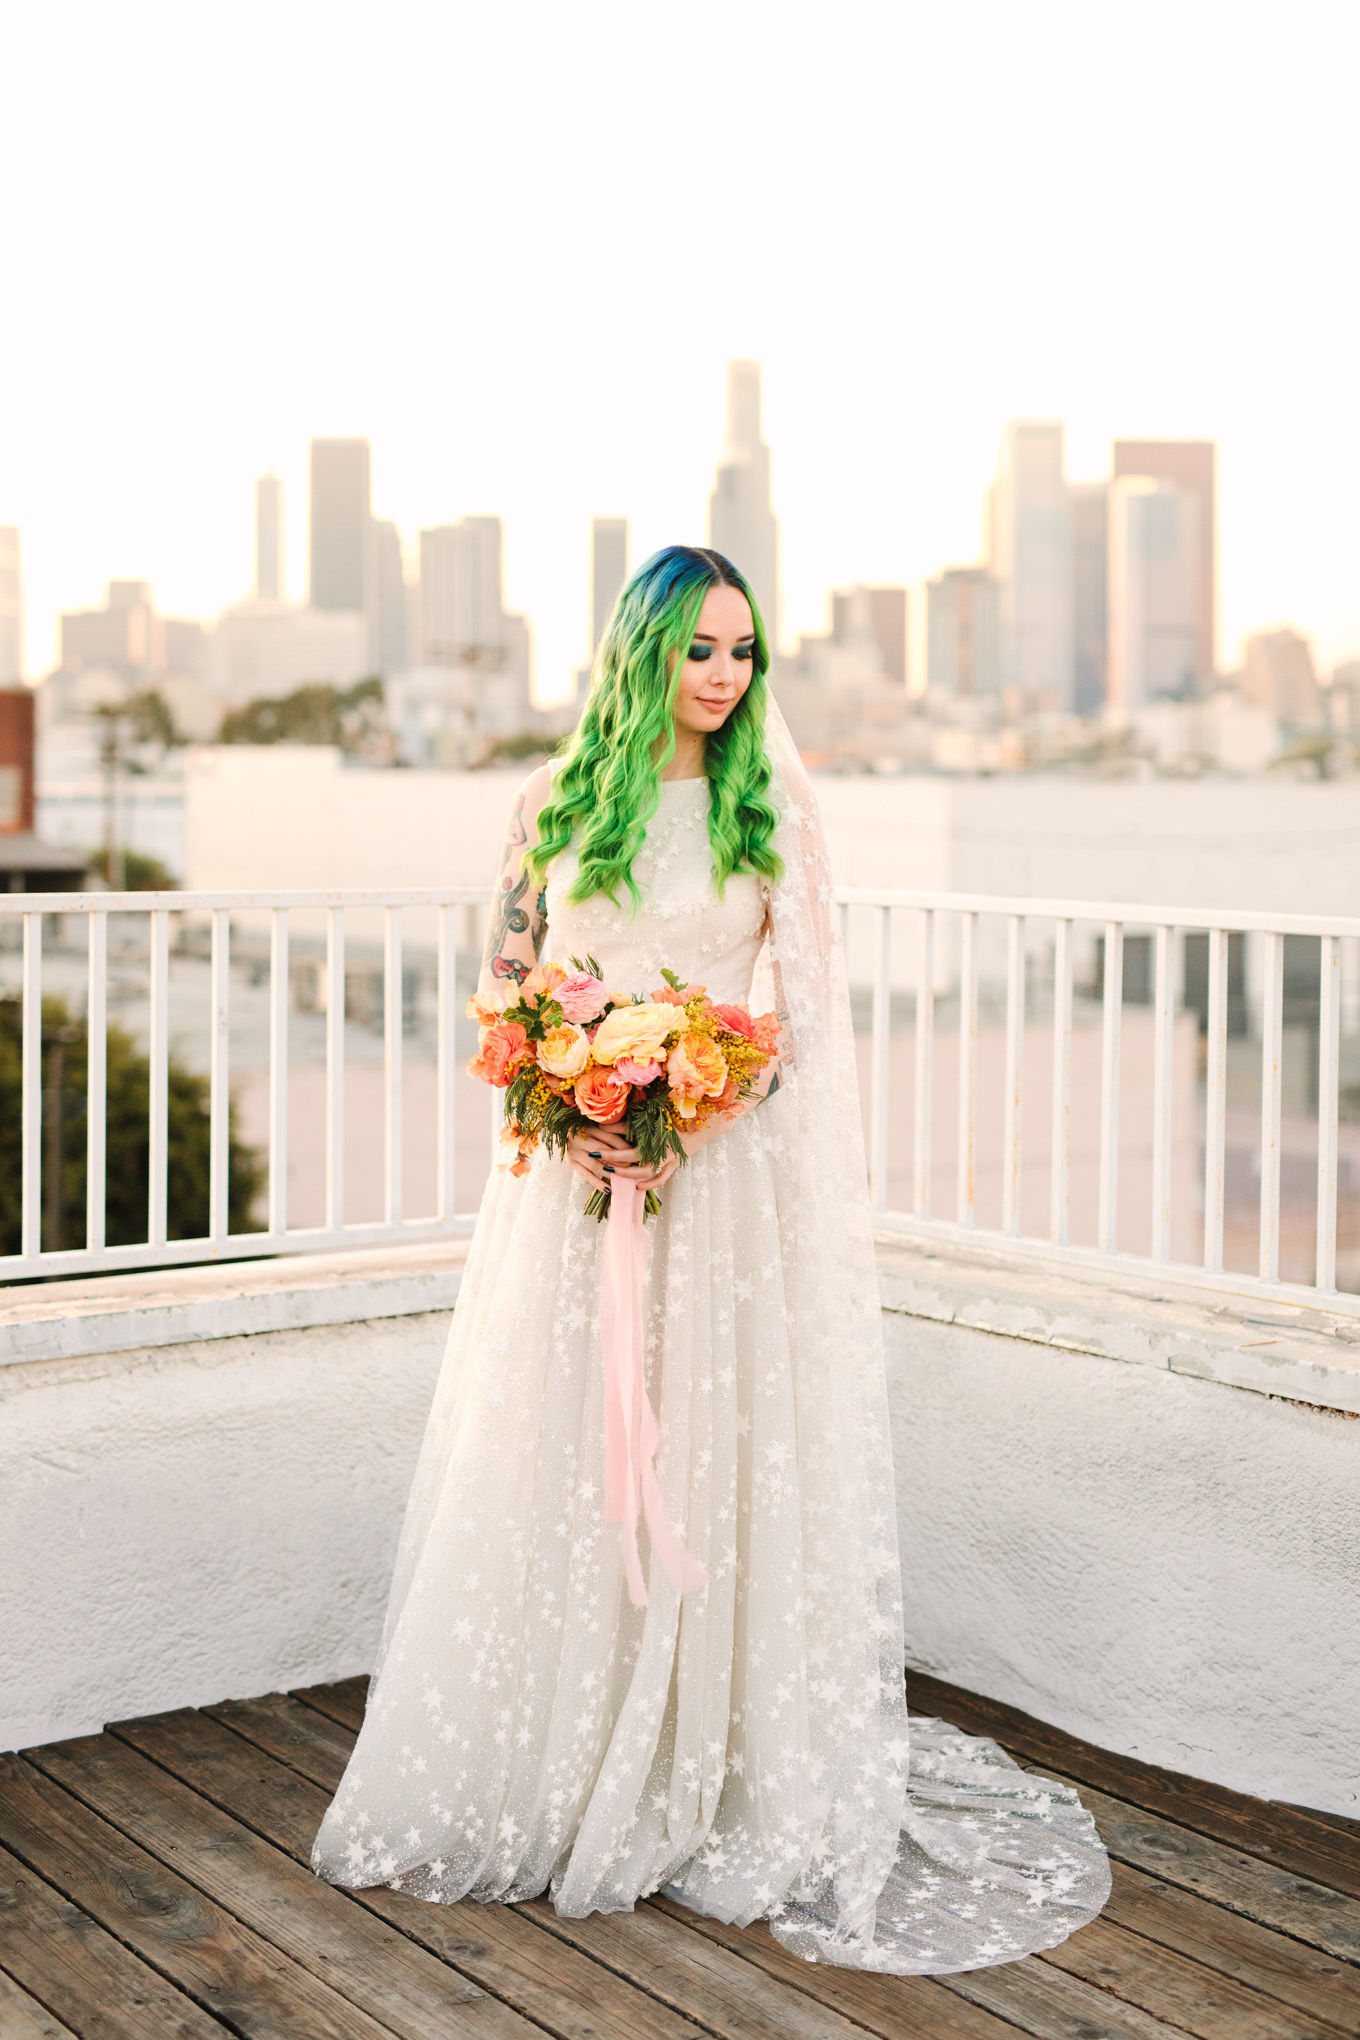 Portraits on rooftop with green hair bride in star glitter gown and star veil | Colorful wedding at The Unique Space Los Angeles published in The Knot Magazine | Fresh and colorful photography for fun-loving couples in Southern California | #colorfulwedding #losangeleswedding #weddingphotography #uniquespace Source: Mary Costa Photography | Los Angeles